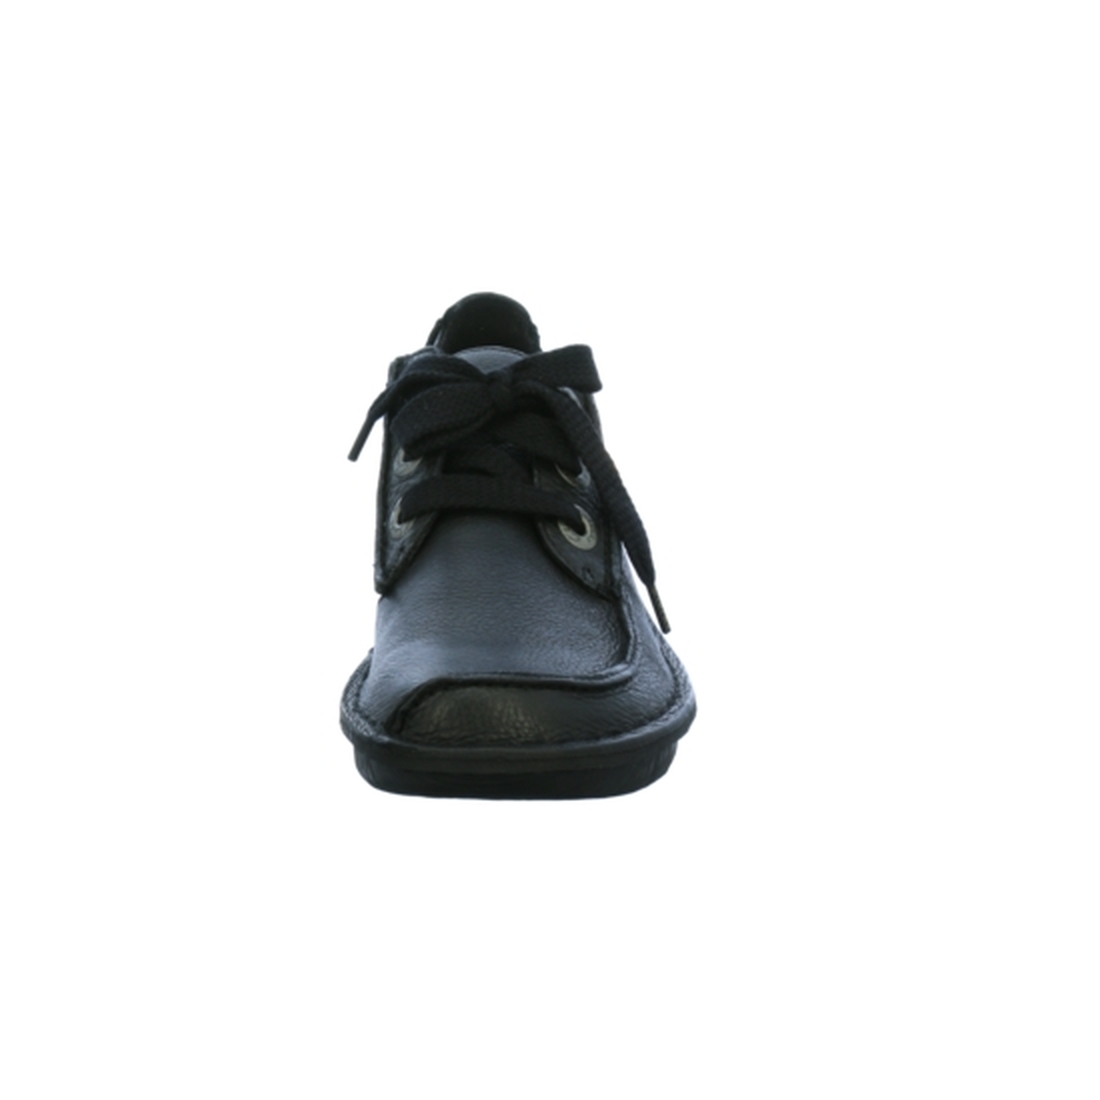 Clarks Funny Dream - Black Greased leather